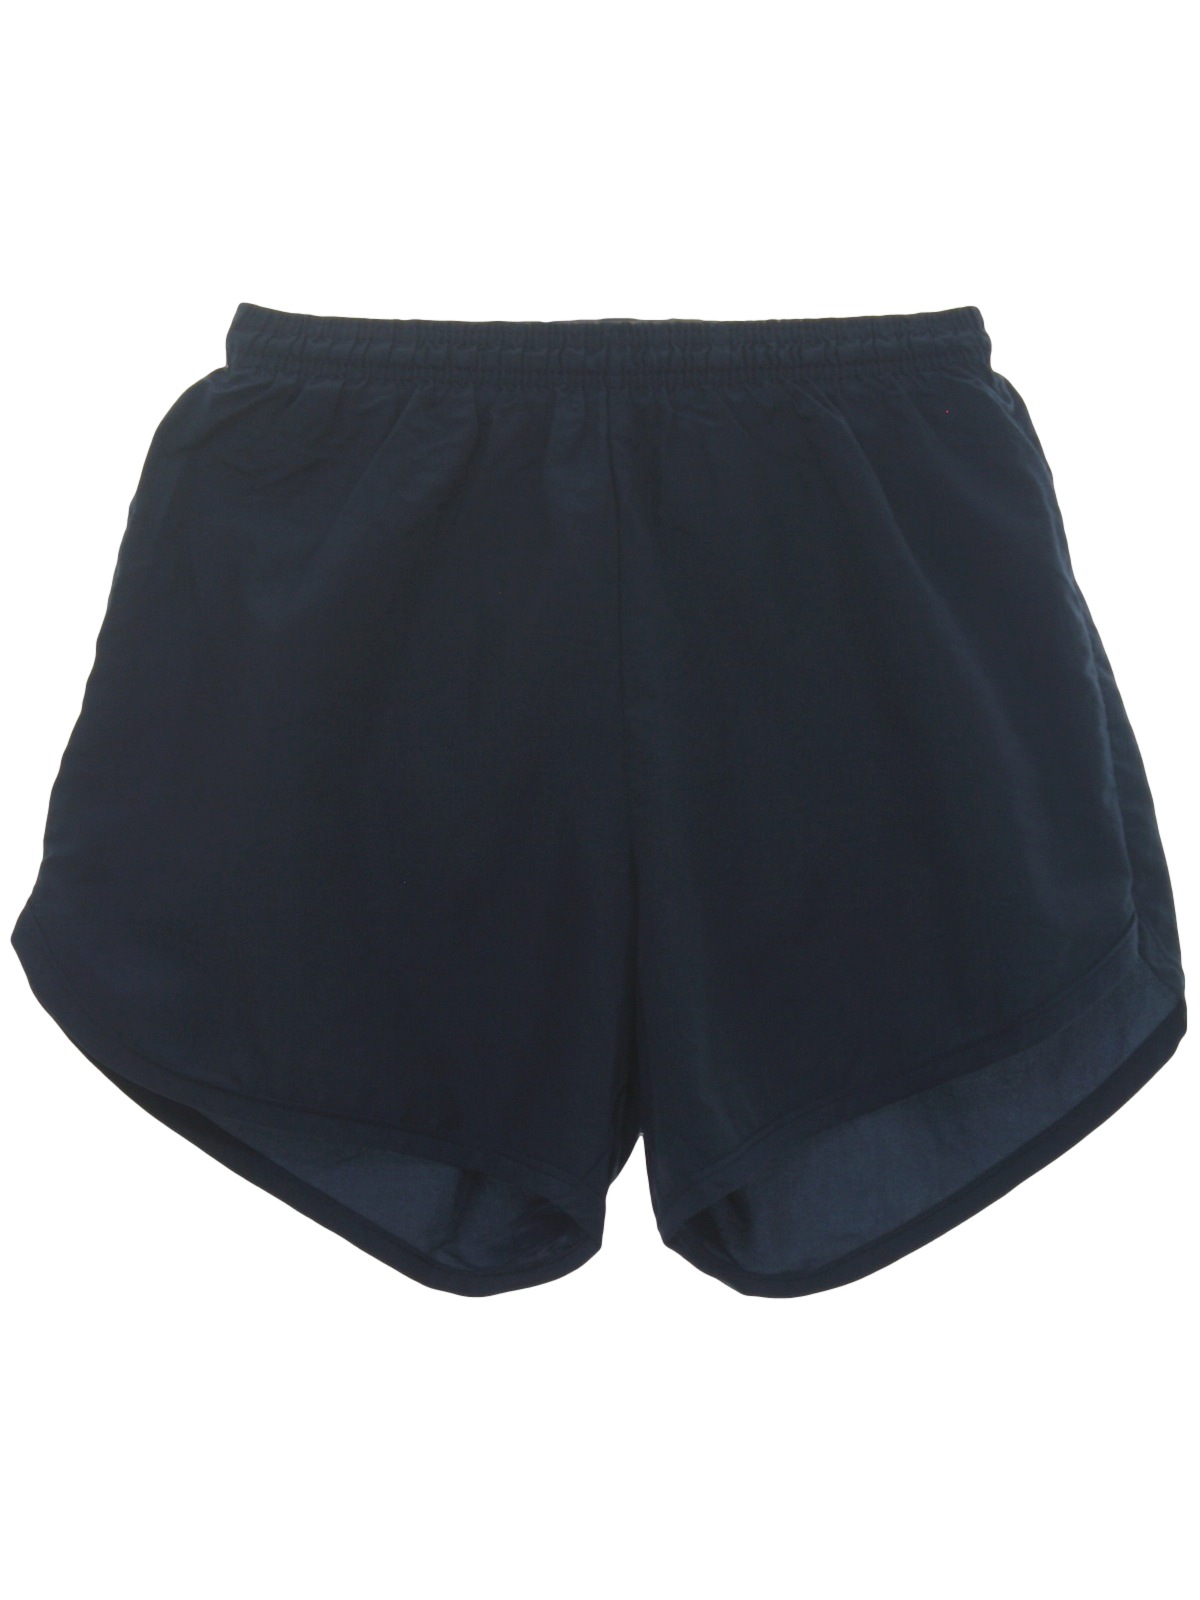 80s Vintage Soffe Shorts: 80s -Soffe- Mens midnight blue background ...